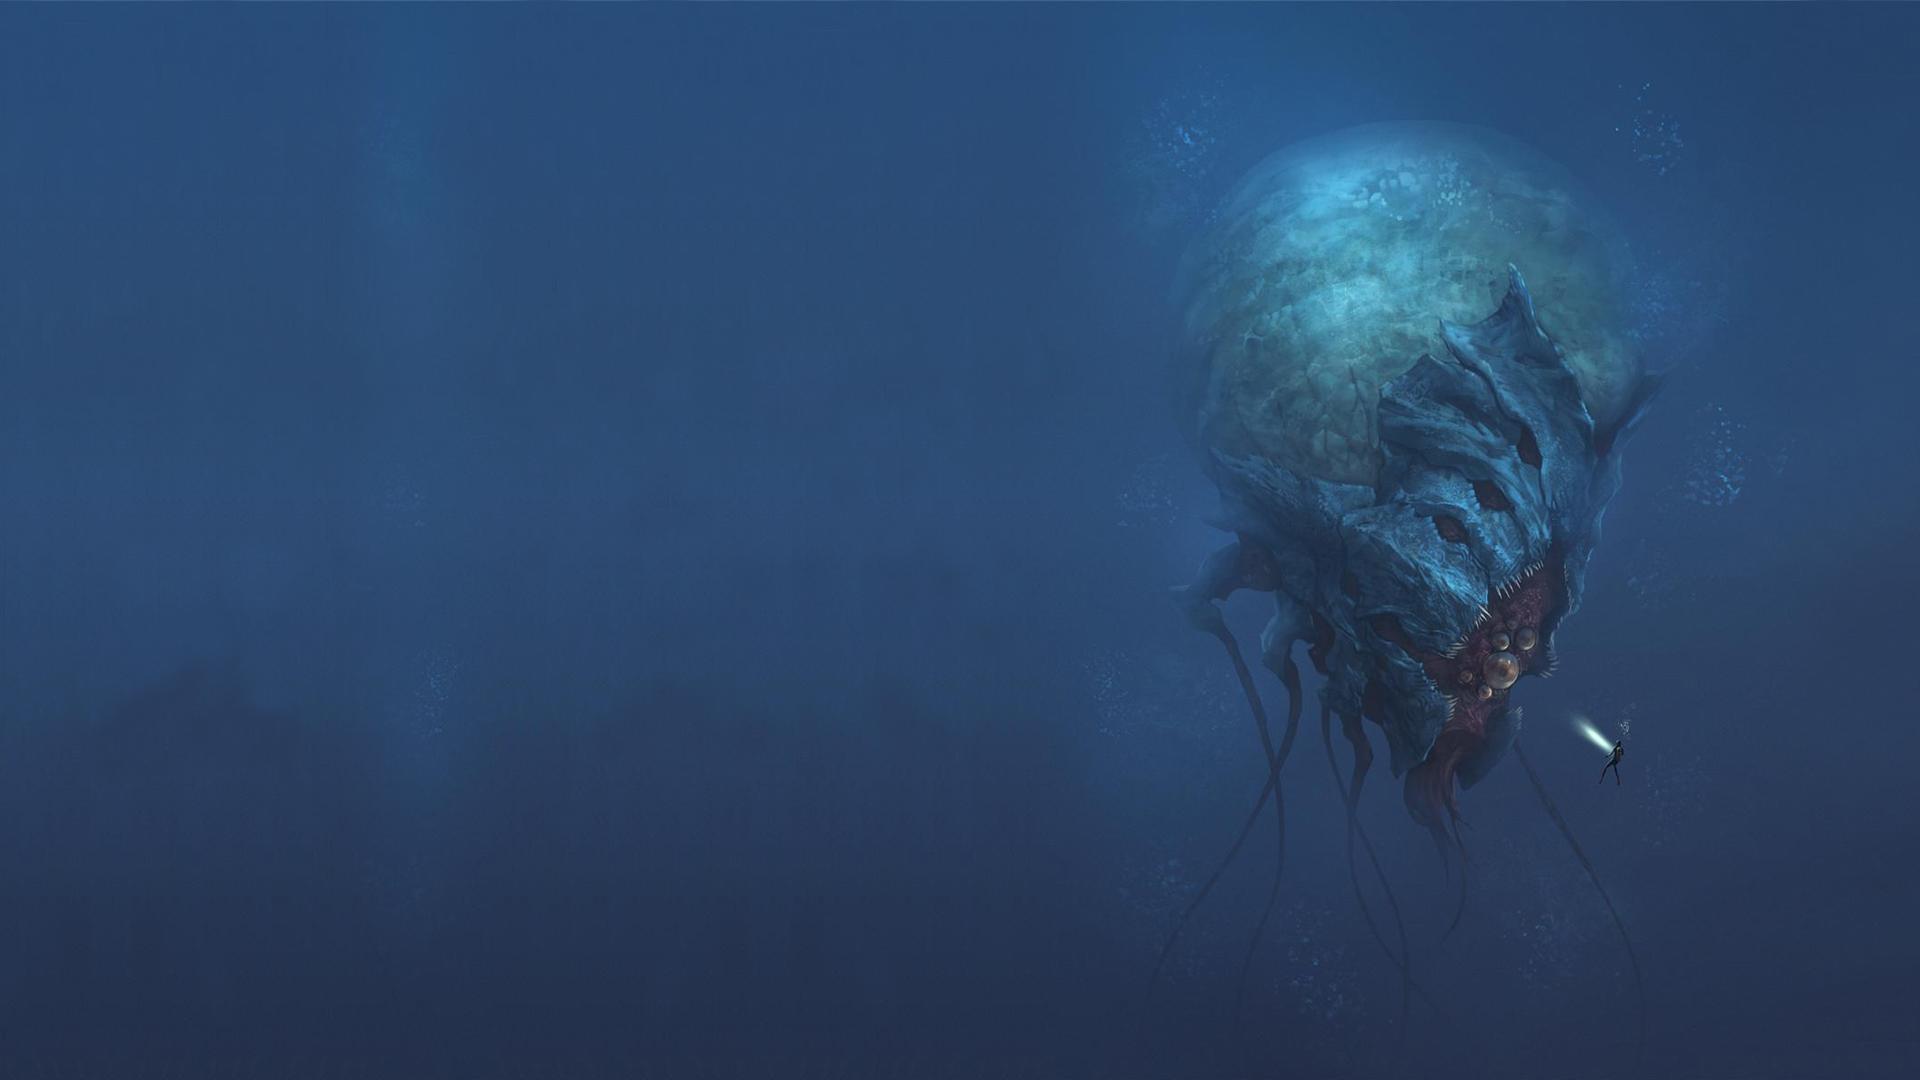 Wallpaper, creepy, creature, sea, abyss, water 1920x1080